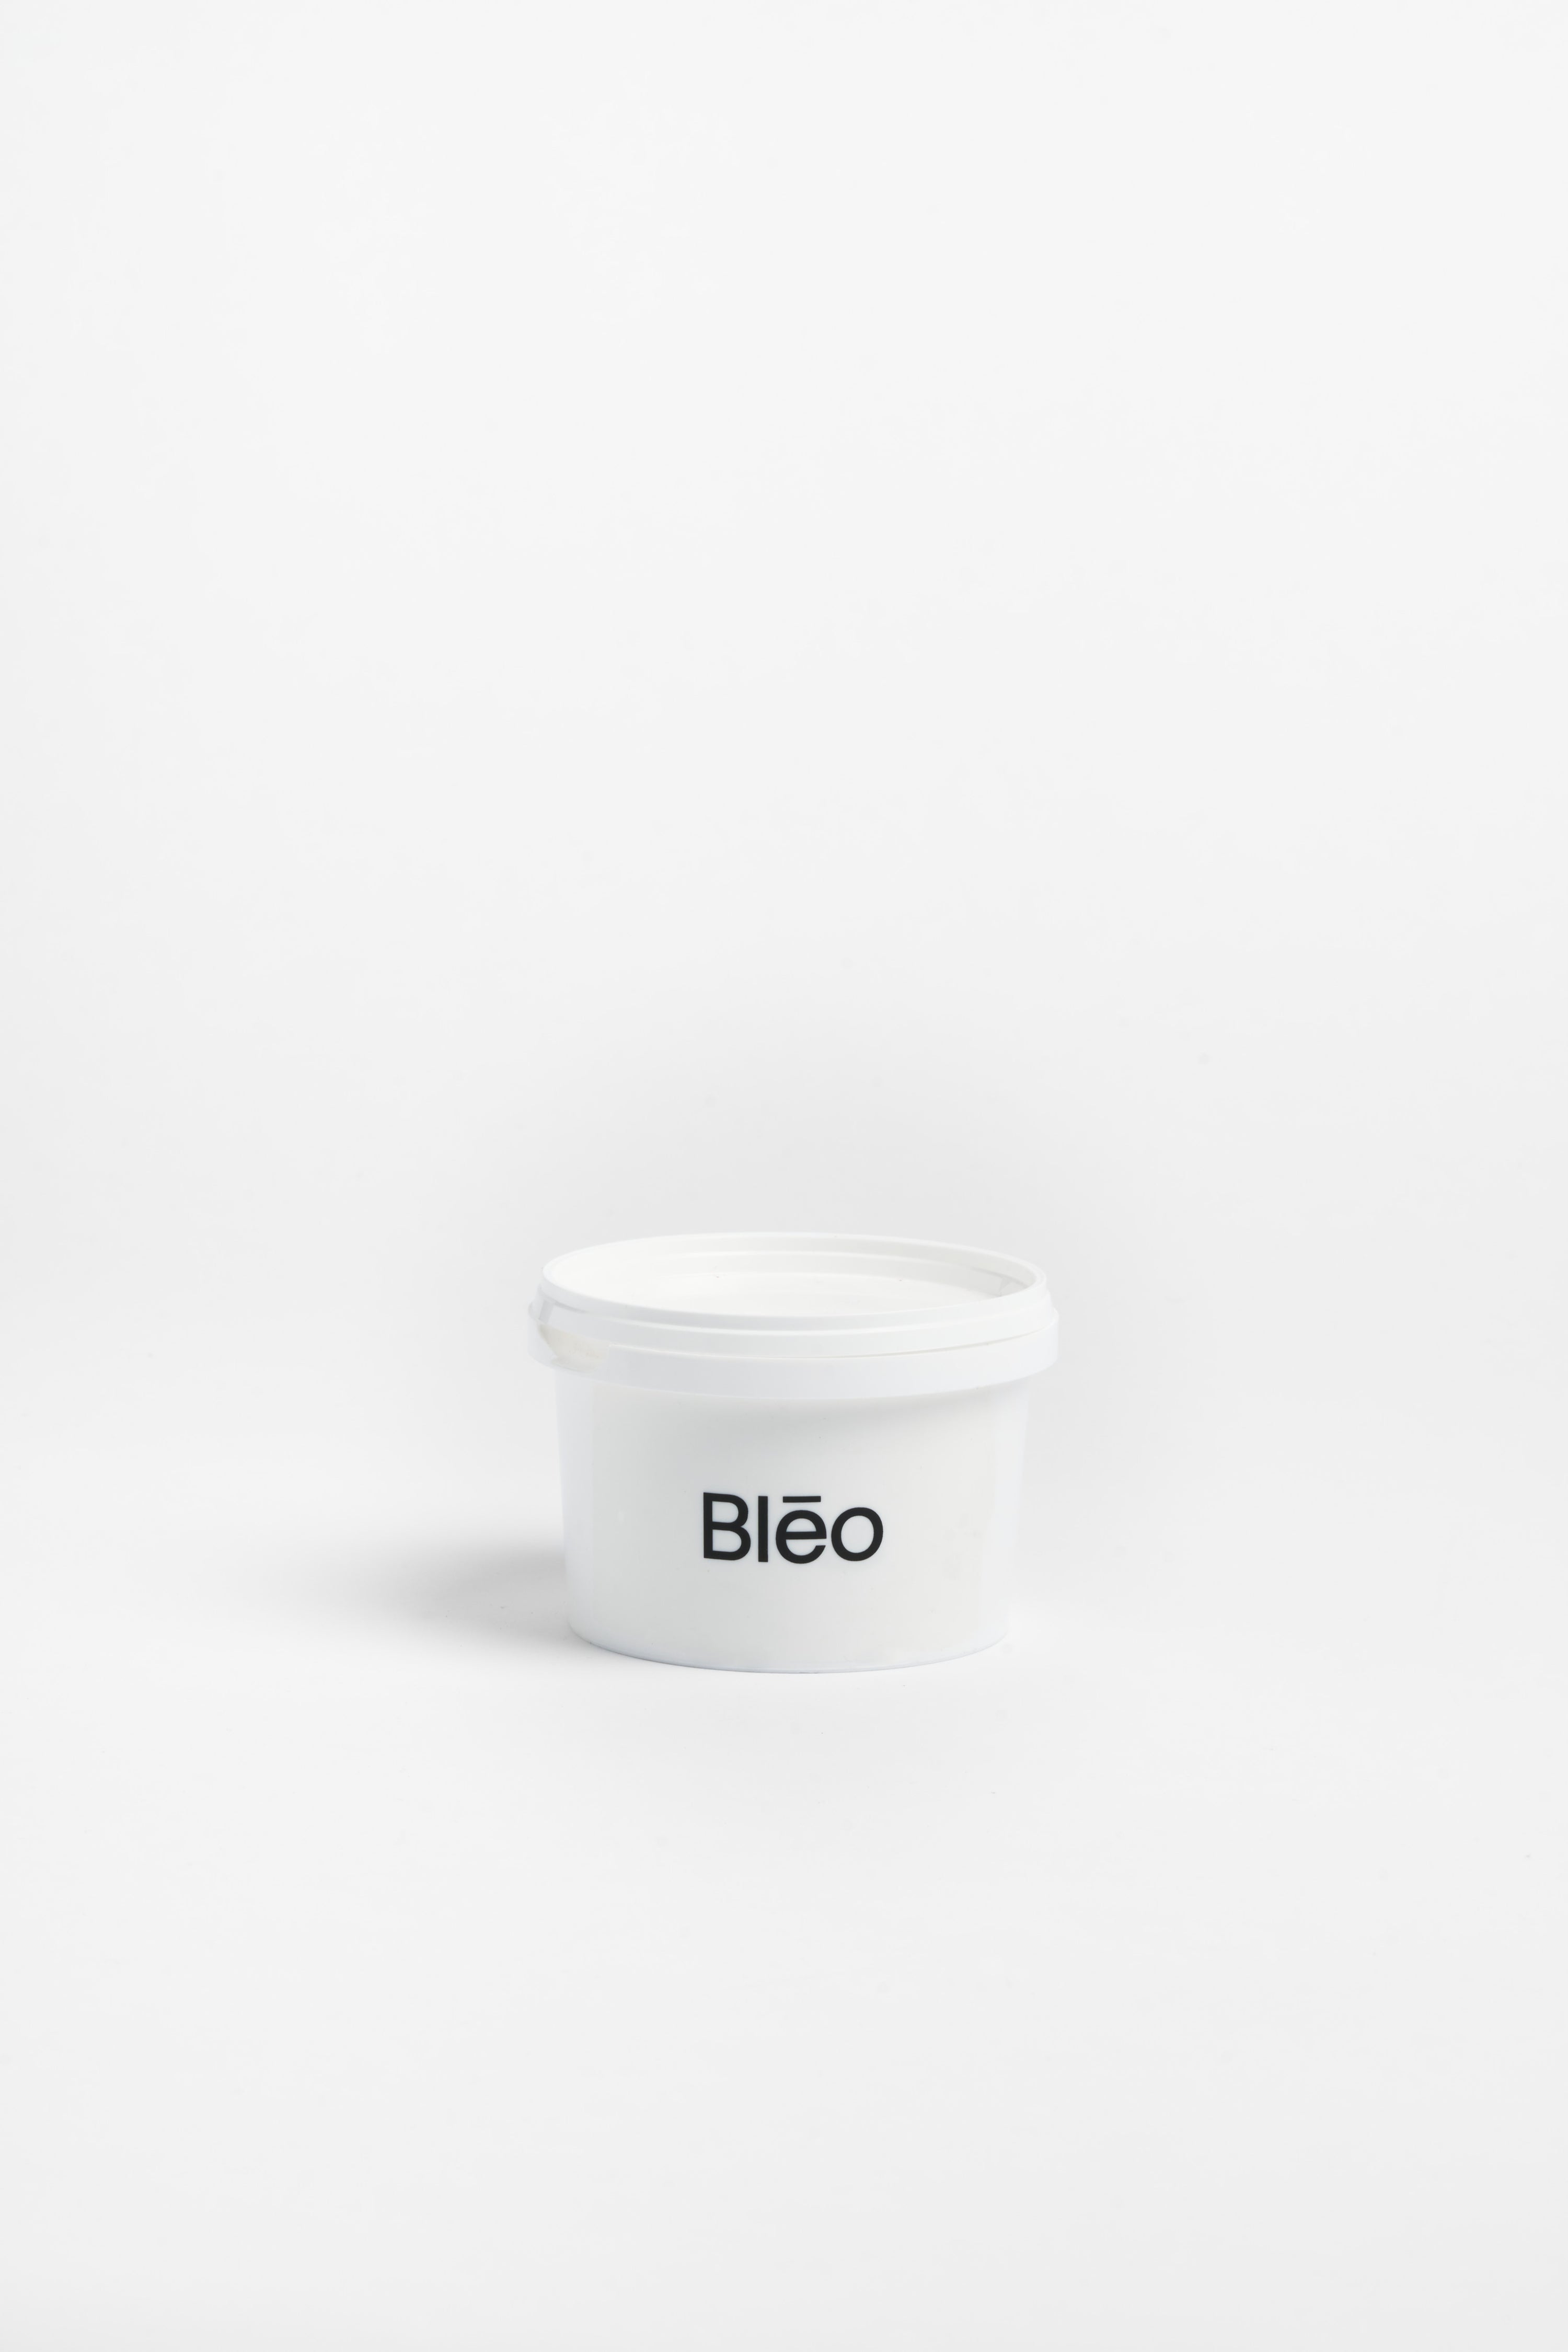 Spackle Filler — Trade grade paint tools by Blēo